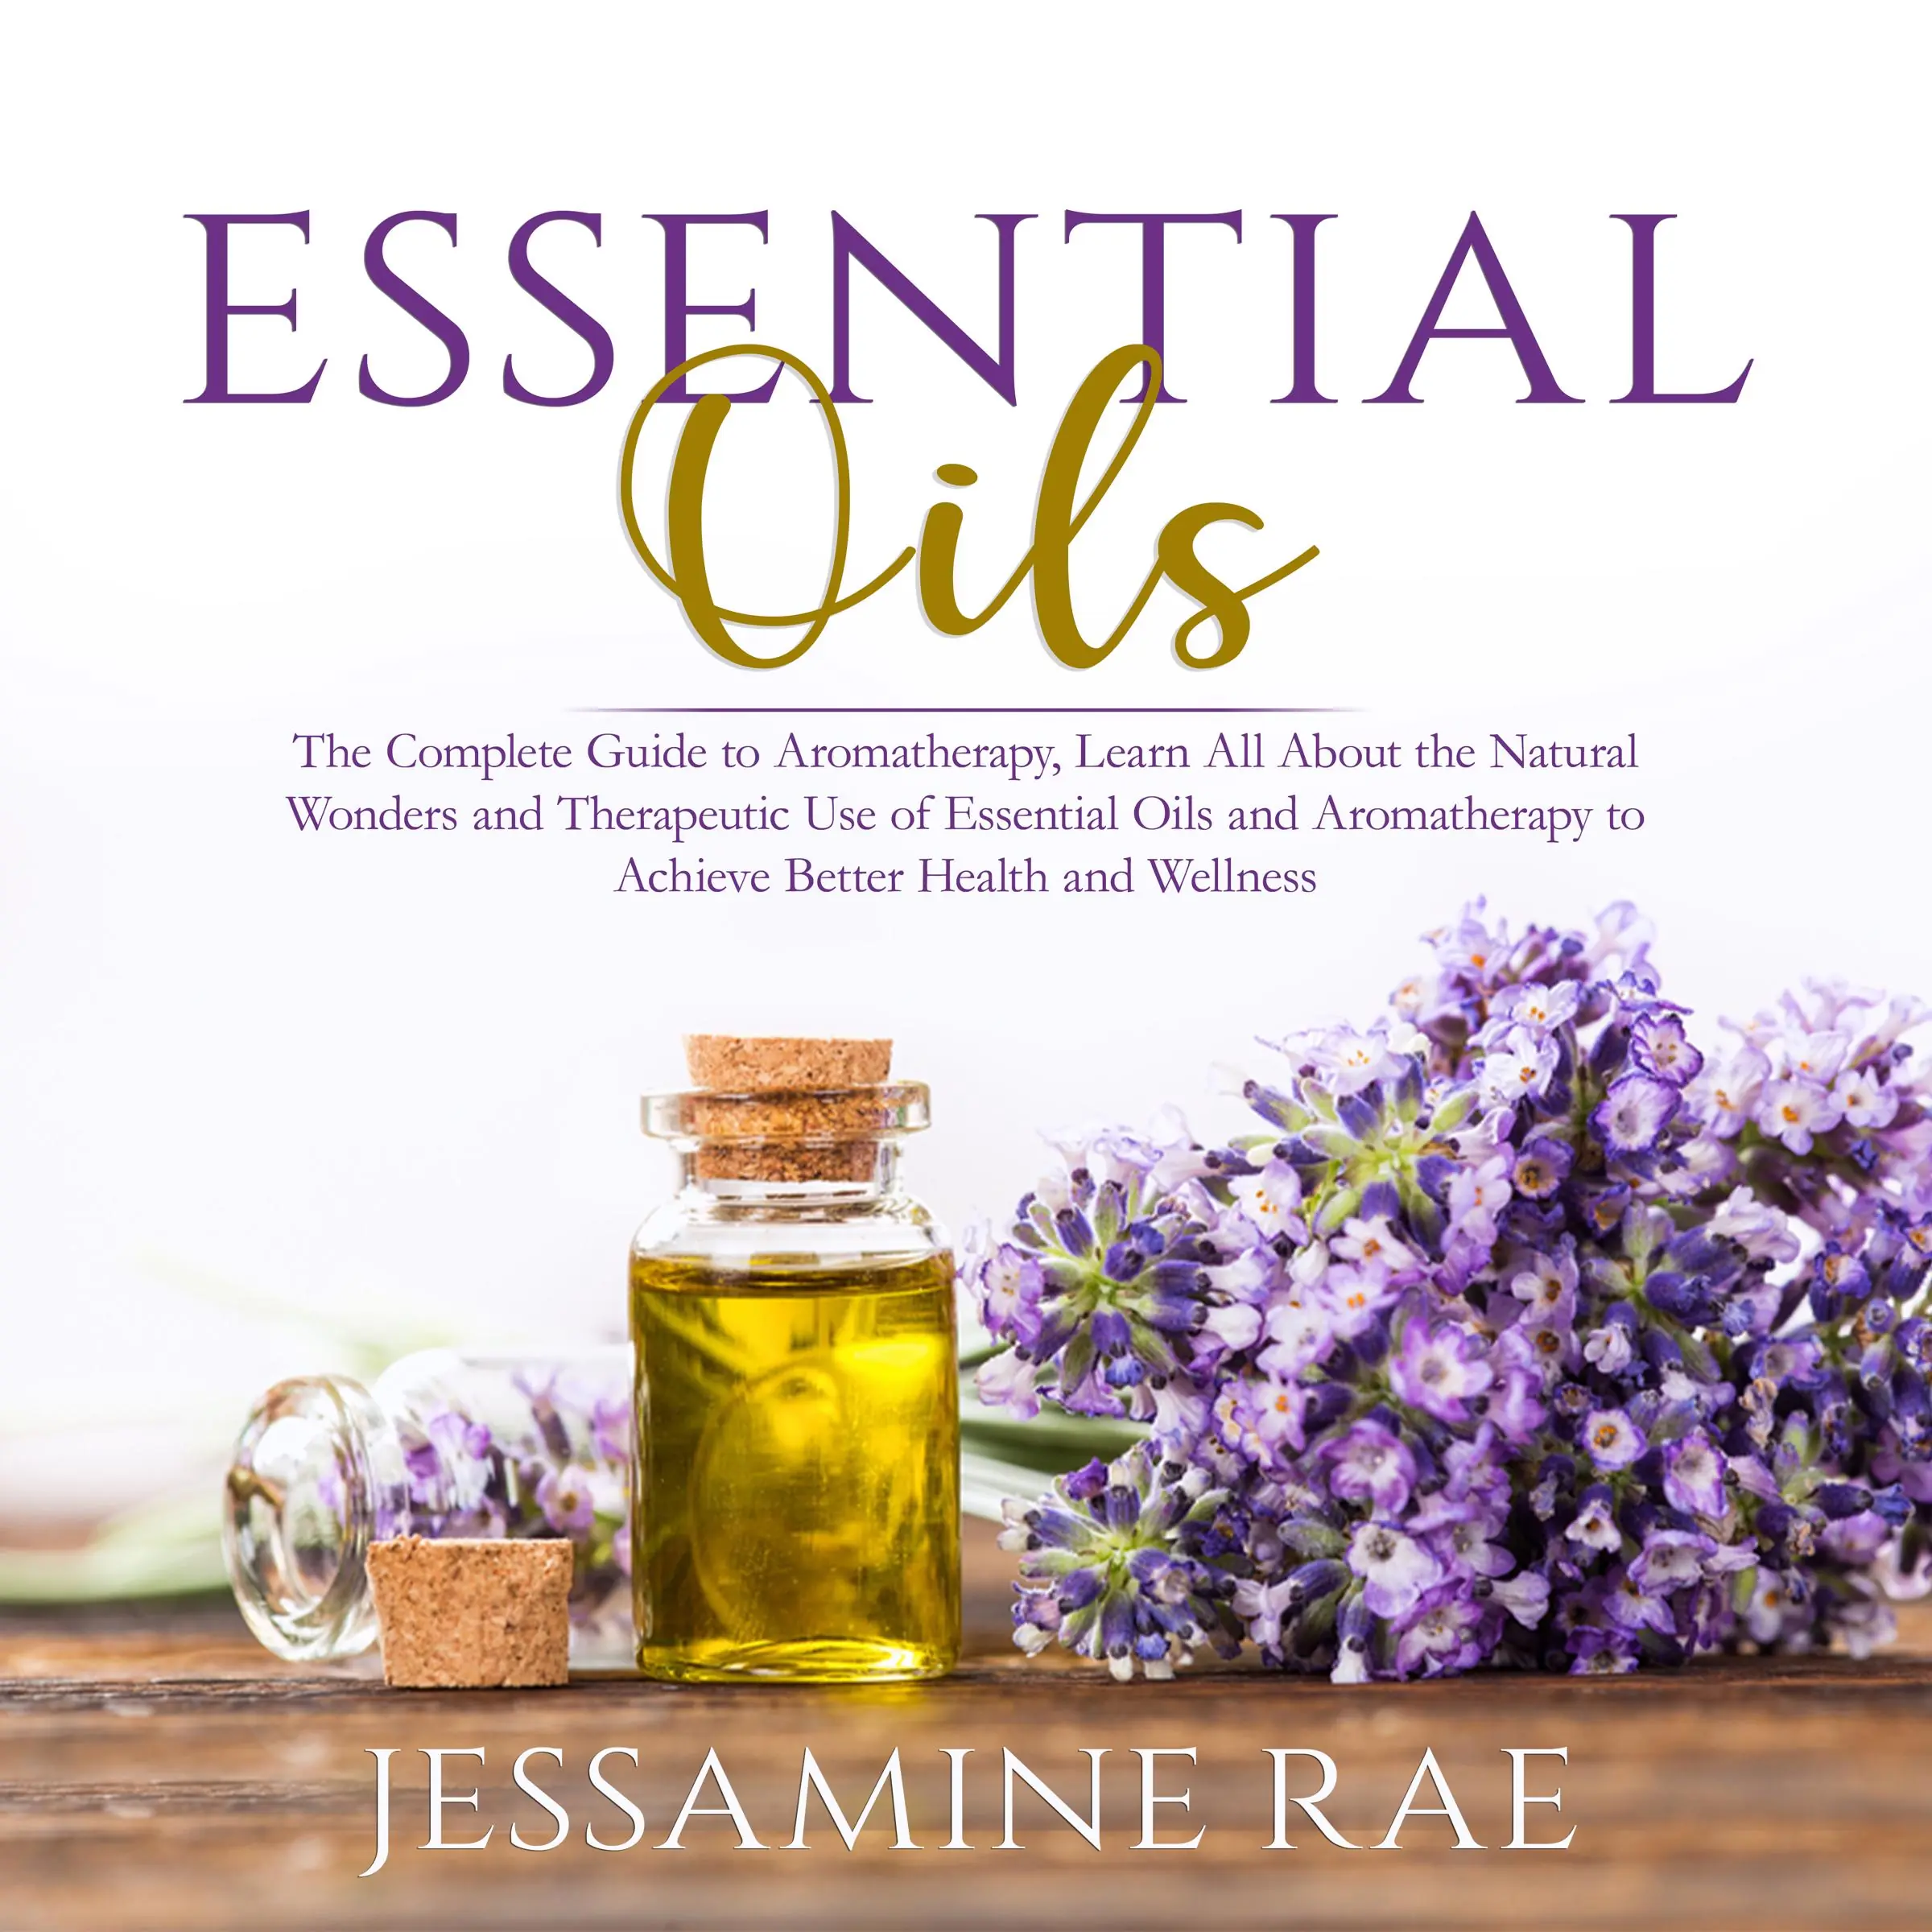 Essential Oils: The Complete Guide to Aromatherapy, Learn All About the Natural Wonders and Therapeutic Use of Essential Oils and Aromatherapy to Achieve Better Health and Wellness Audiobook by Jessamine Rae